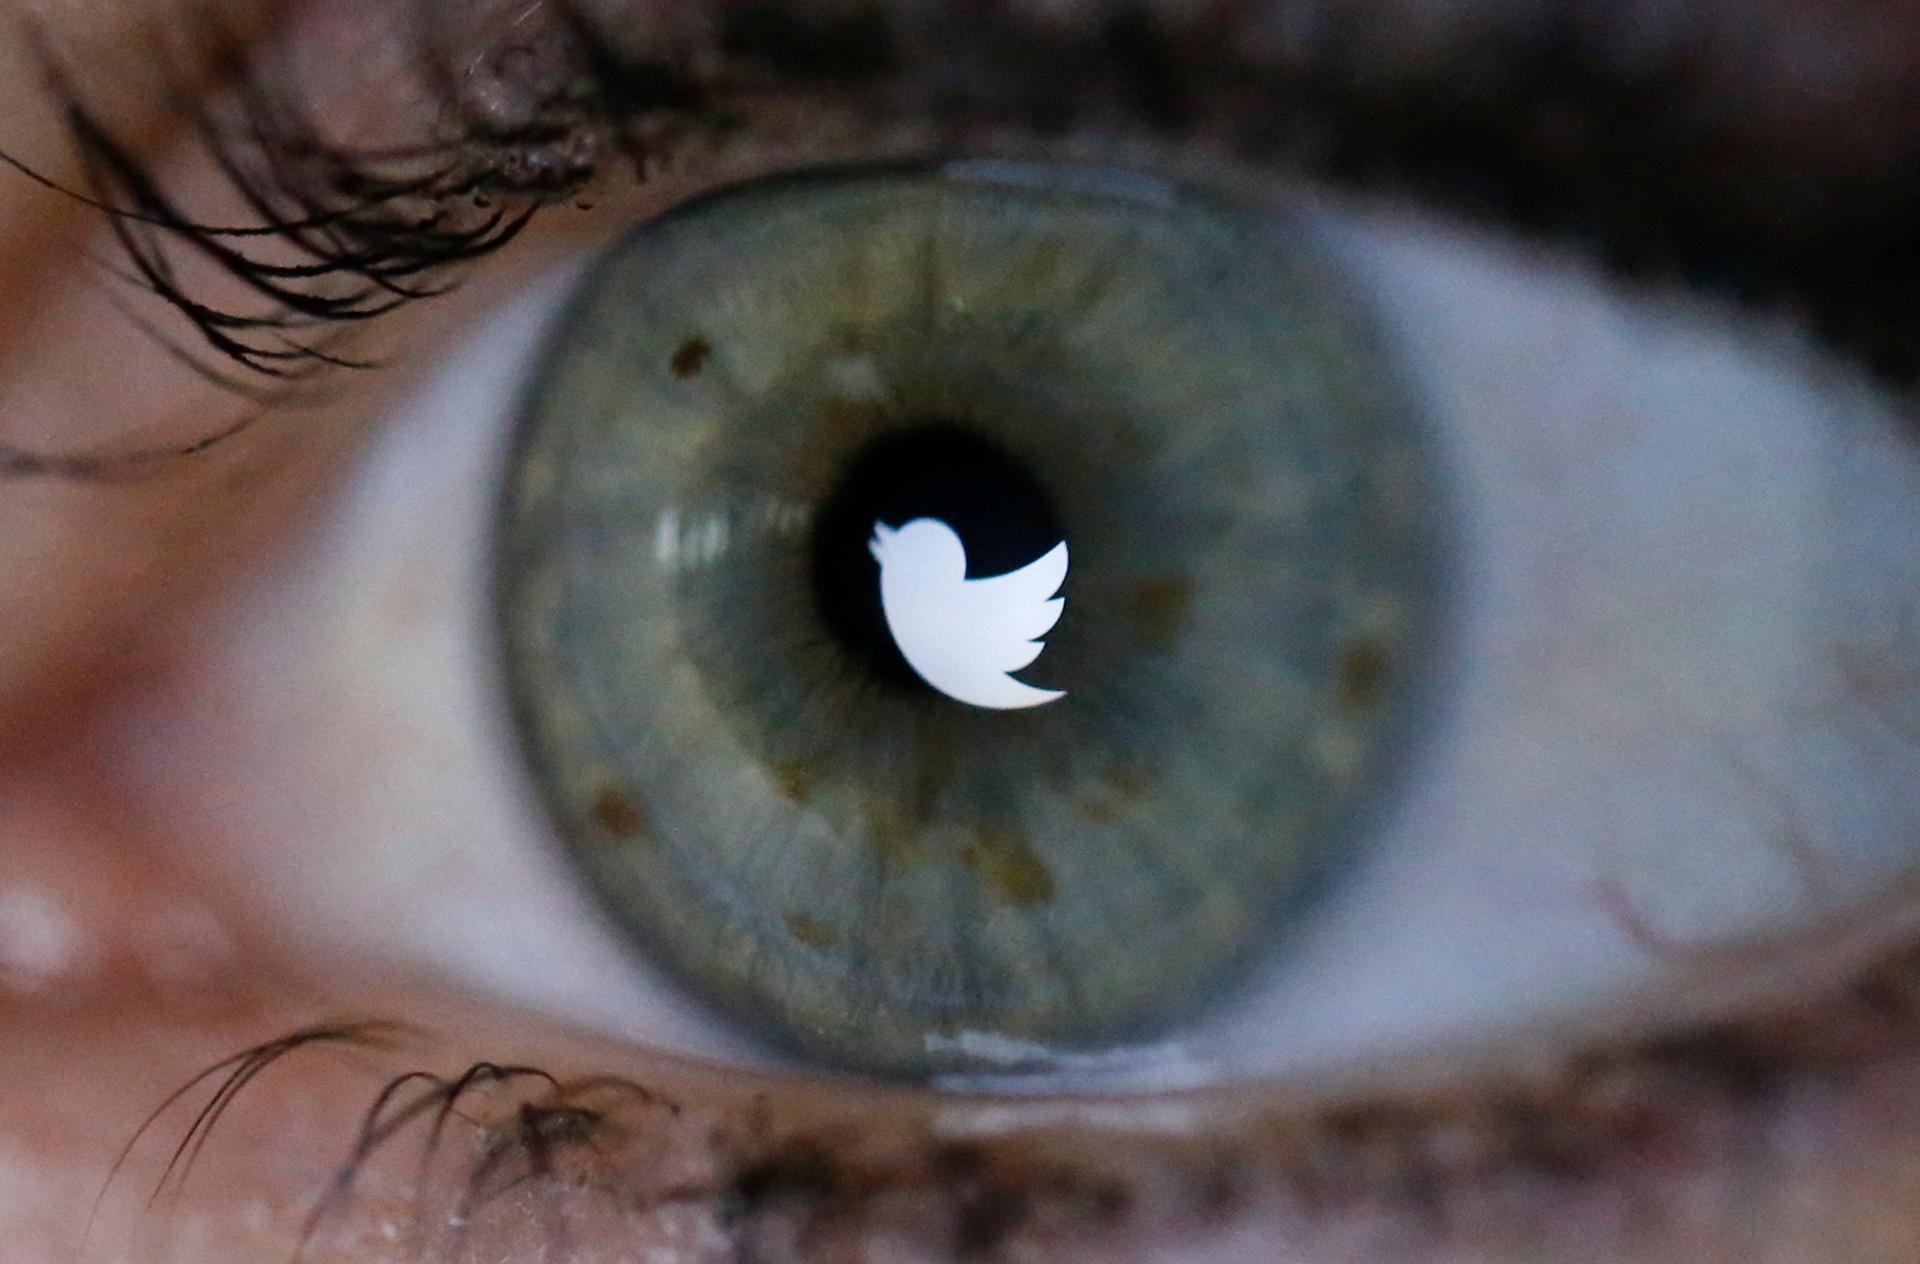 An illustration picture shows the Twitter logo reflected in the eye of a woman in Berlin.